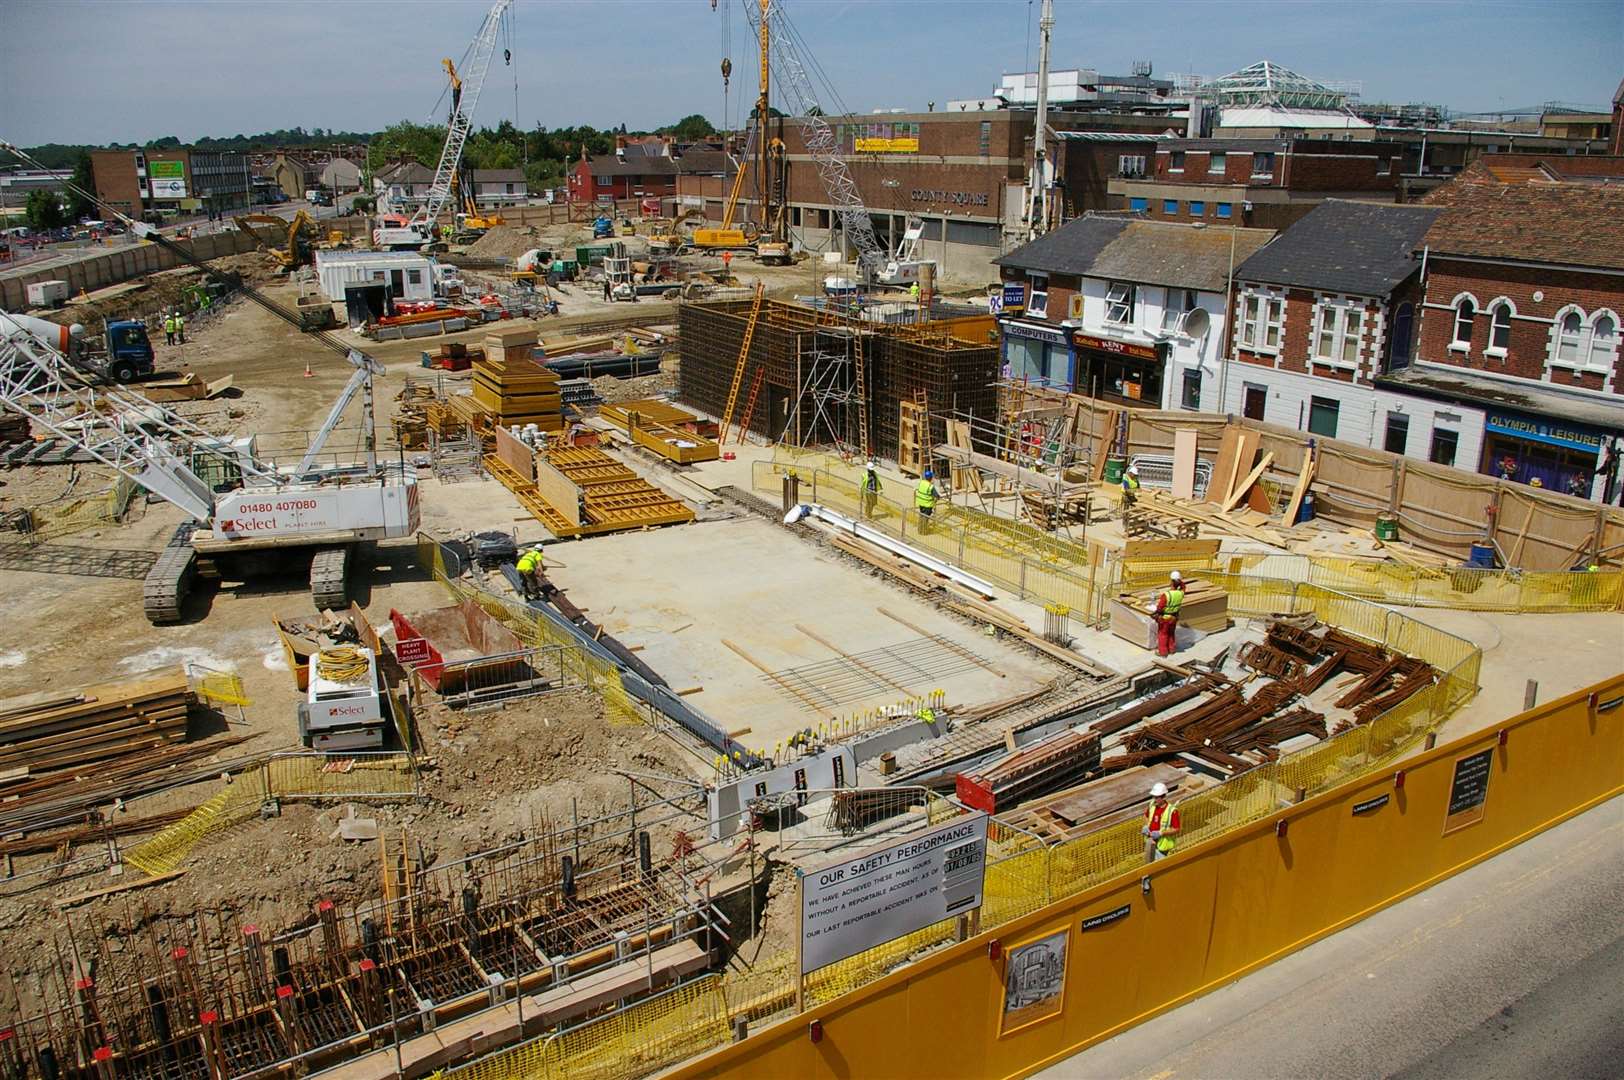 The Ashford construction site, pictured in 2006